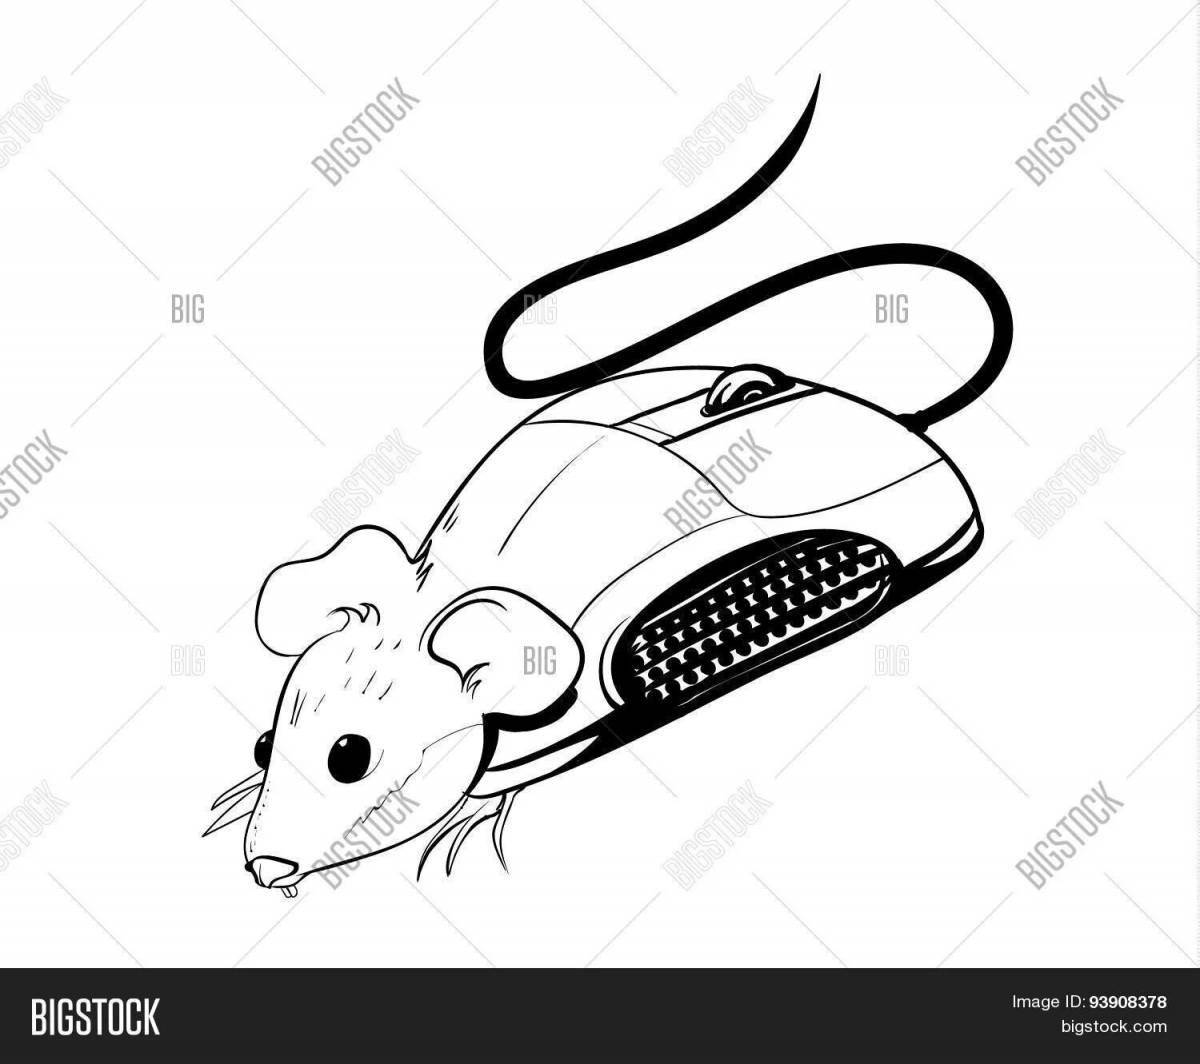 Playful mouse with glasses coloring page